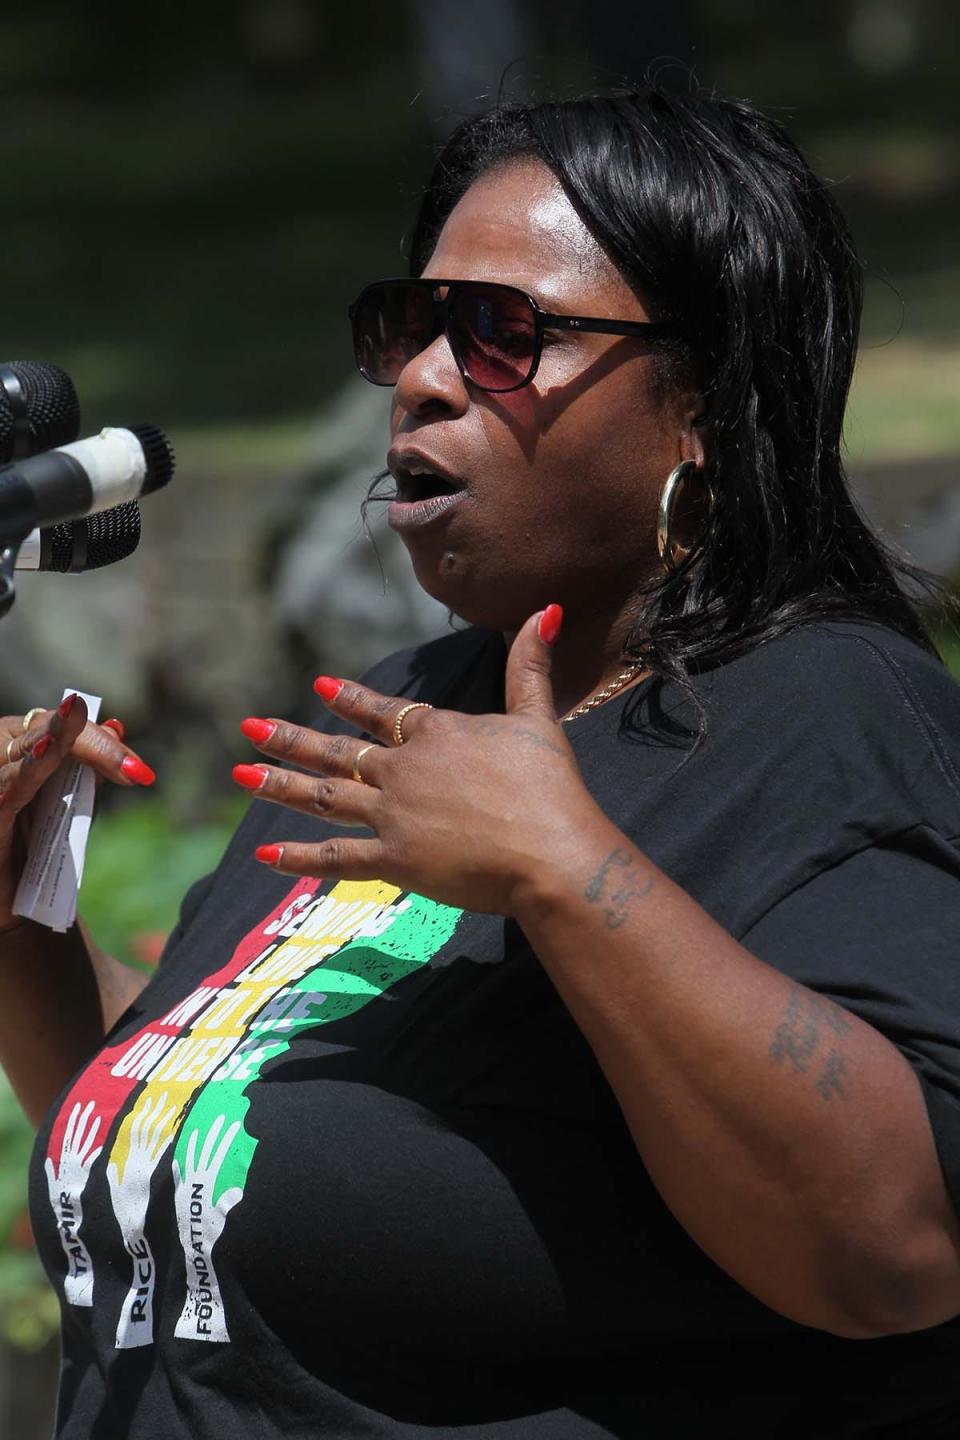 Samaria Rice, the mother of Tamir Rice, speaks during a protest Saturday in Akron. Tamir Rice, 12, was shot and killed in 2014 by a Cleveland police officer.